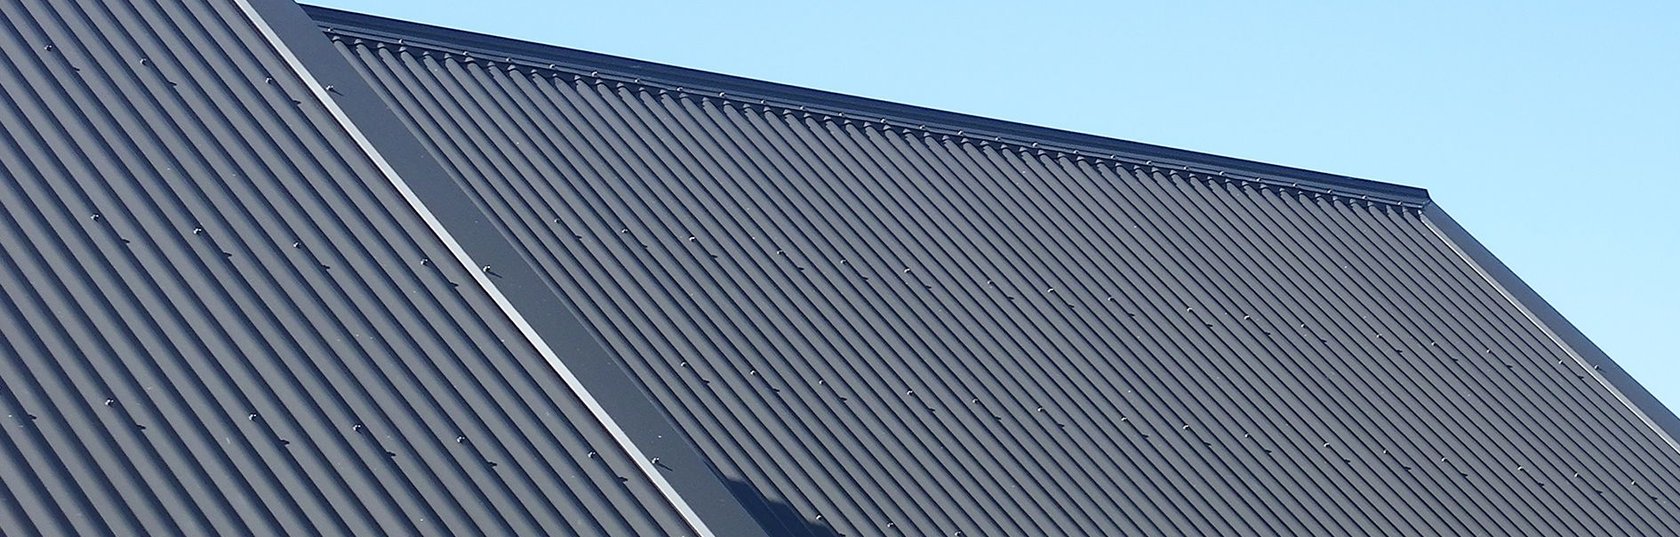 Capped off to perfection: alternative roofing products
